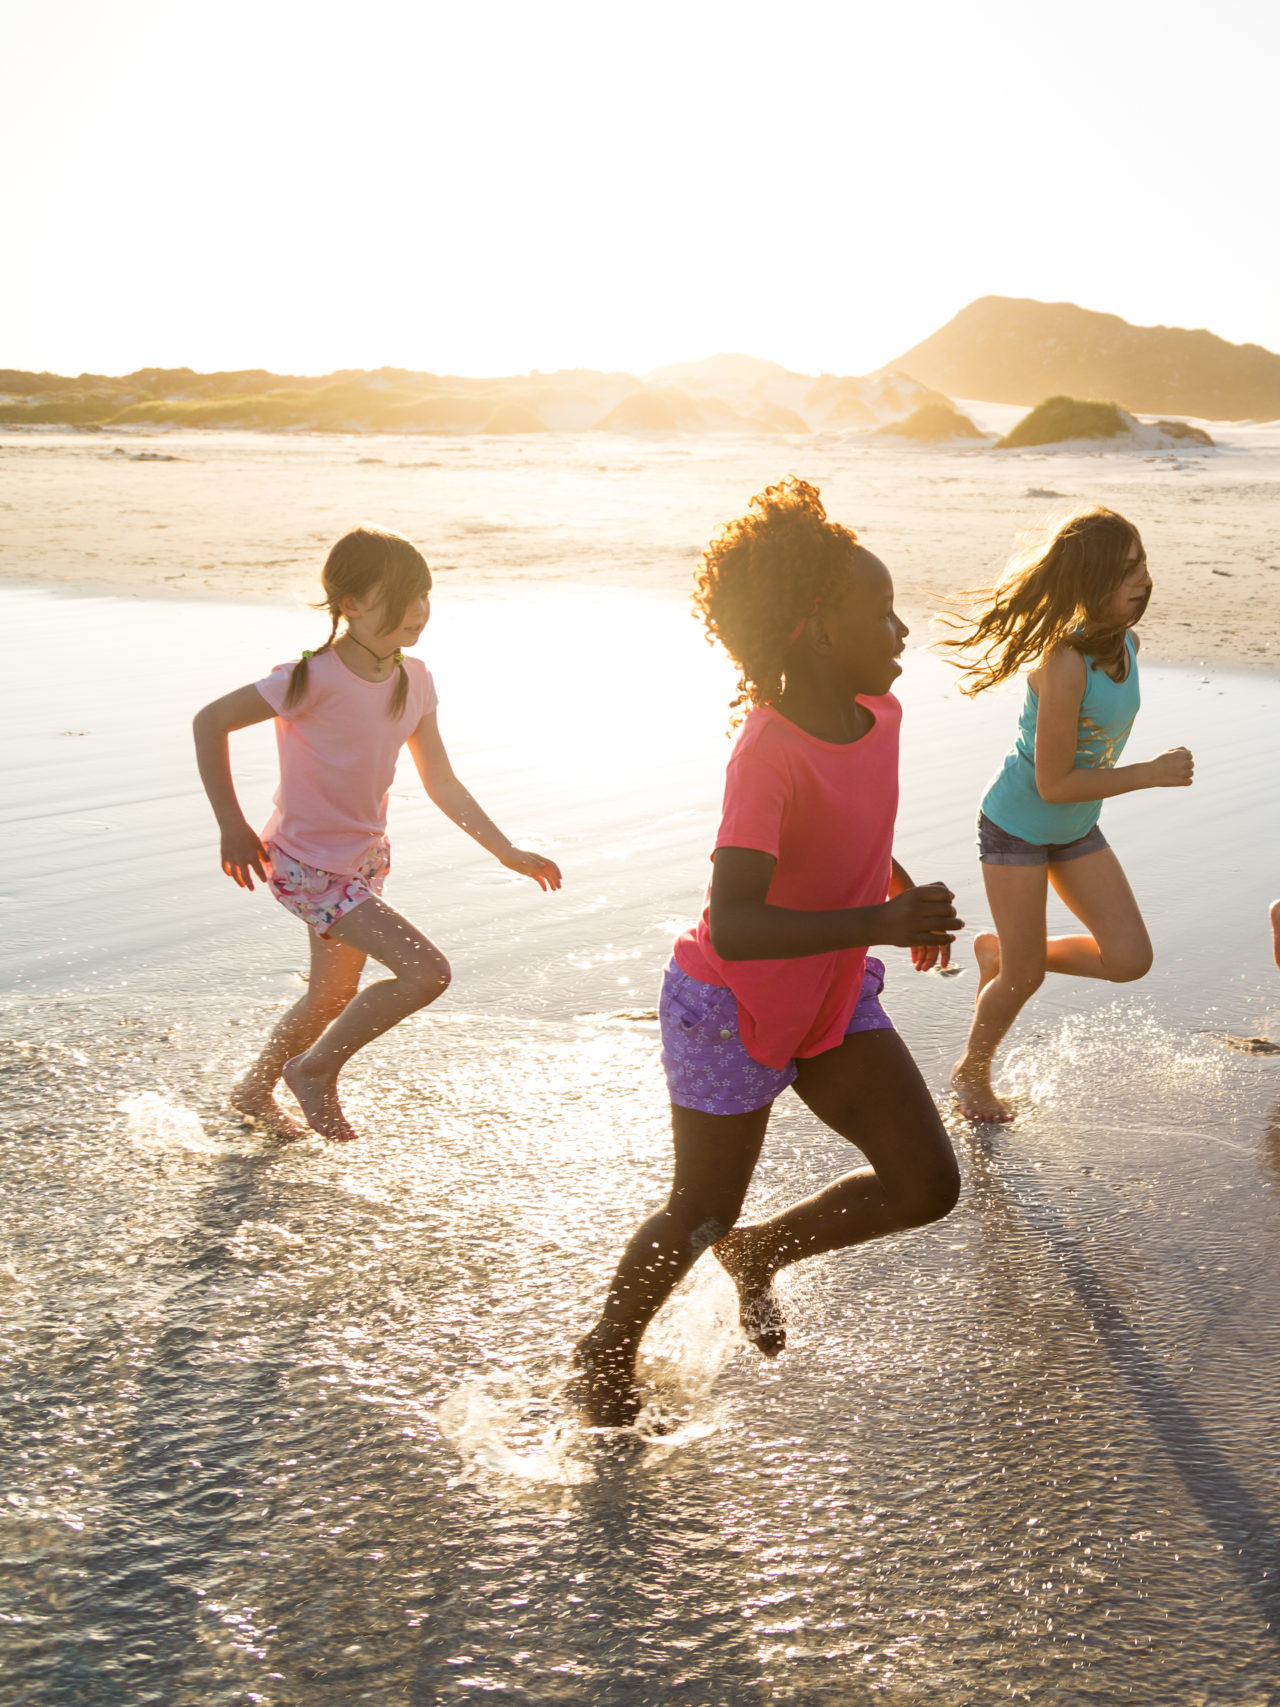 Group of children playing and running together on a beach at sunset